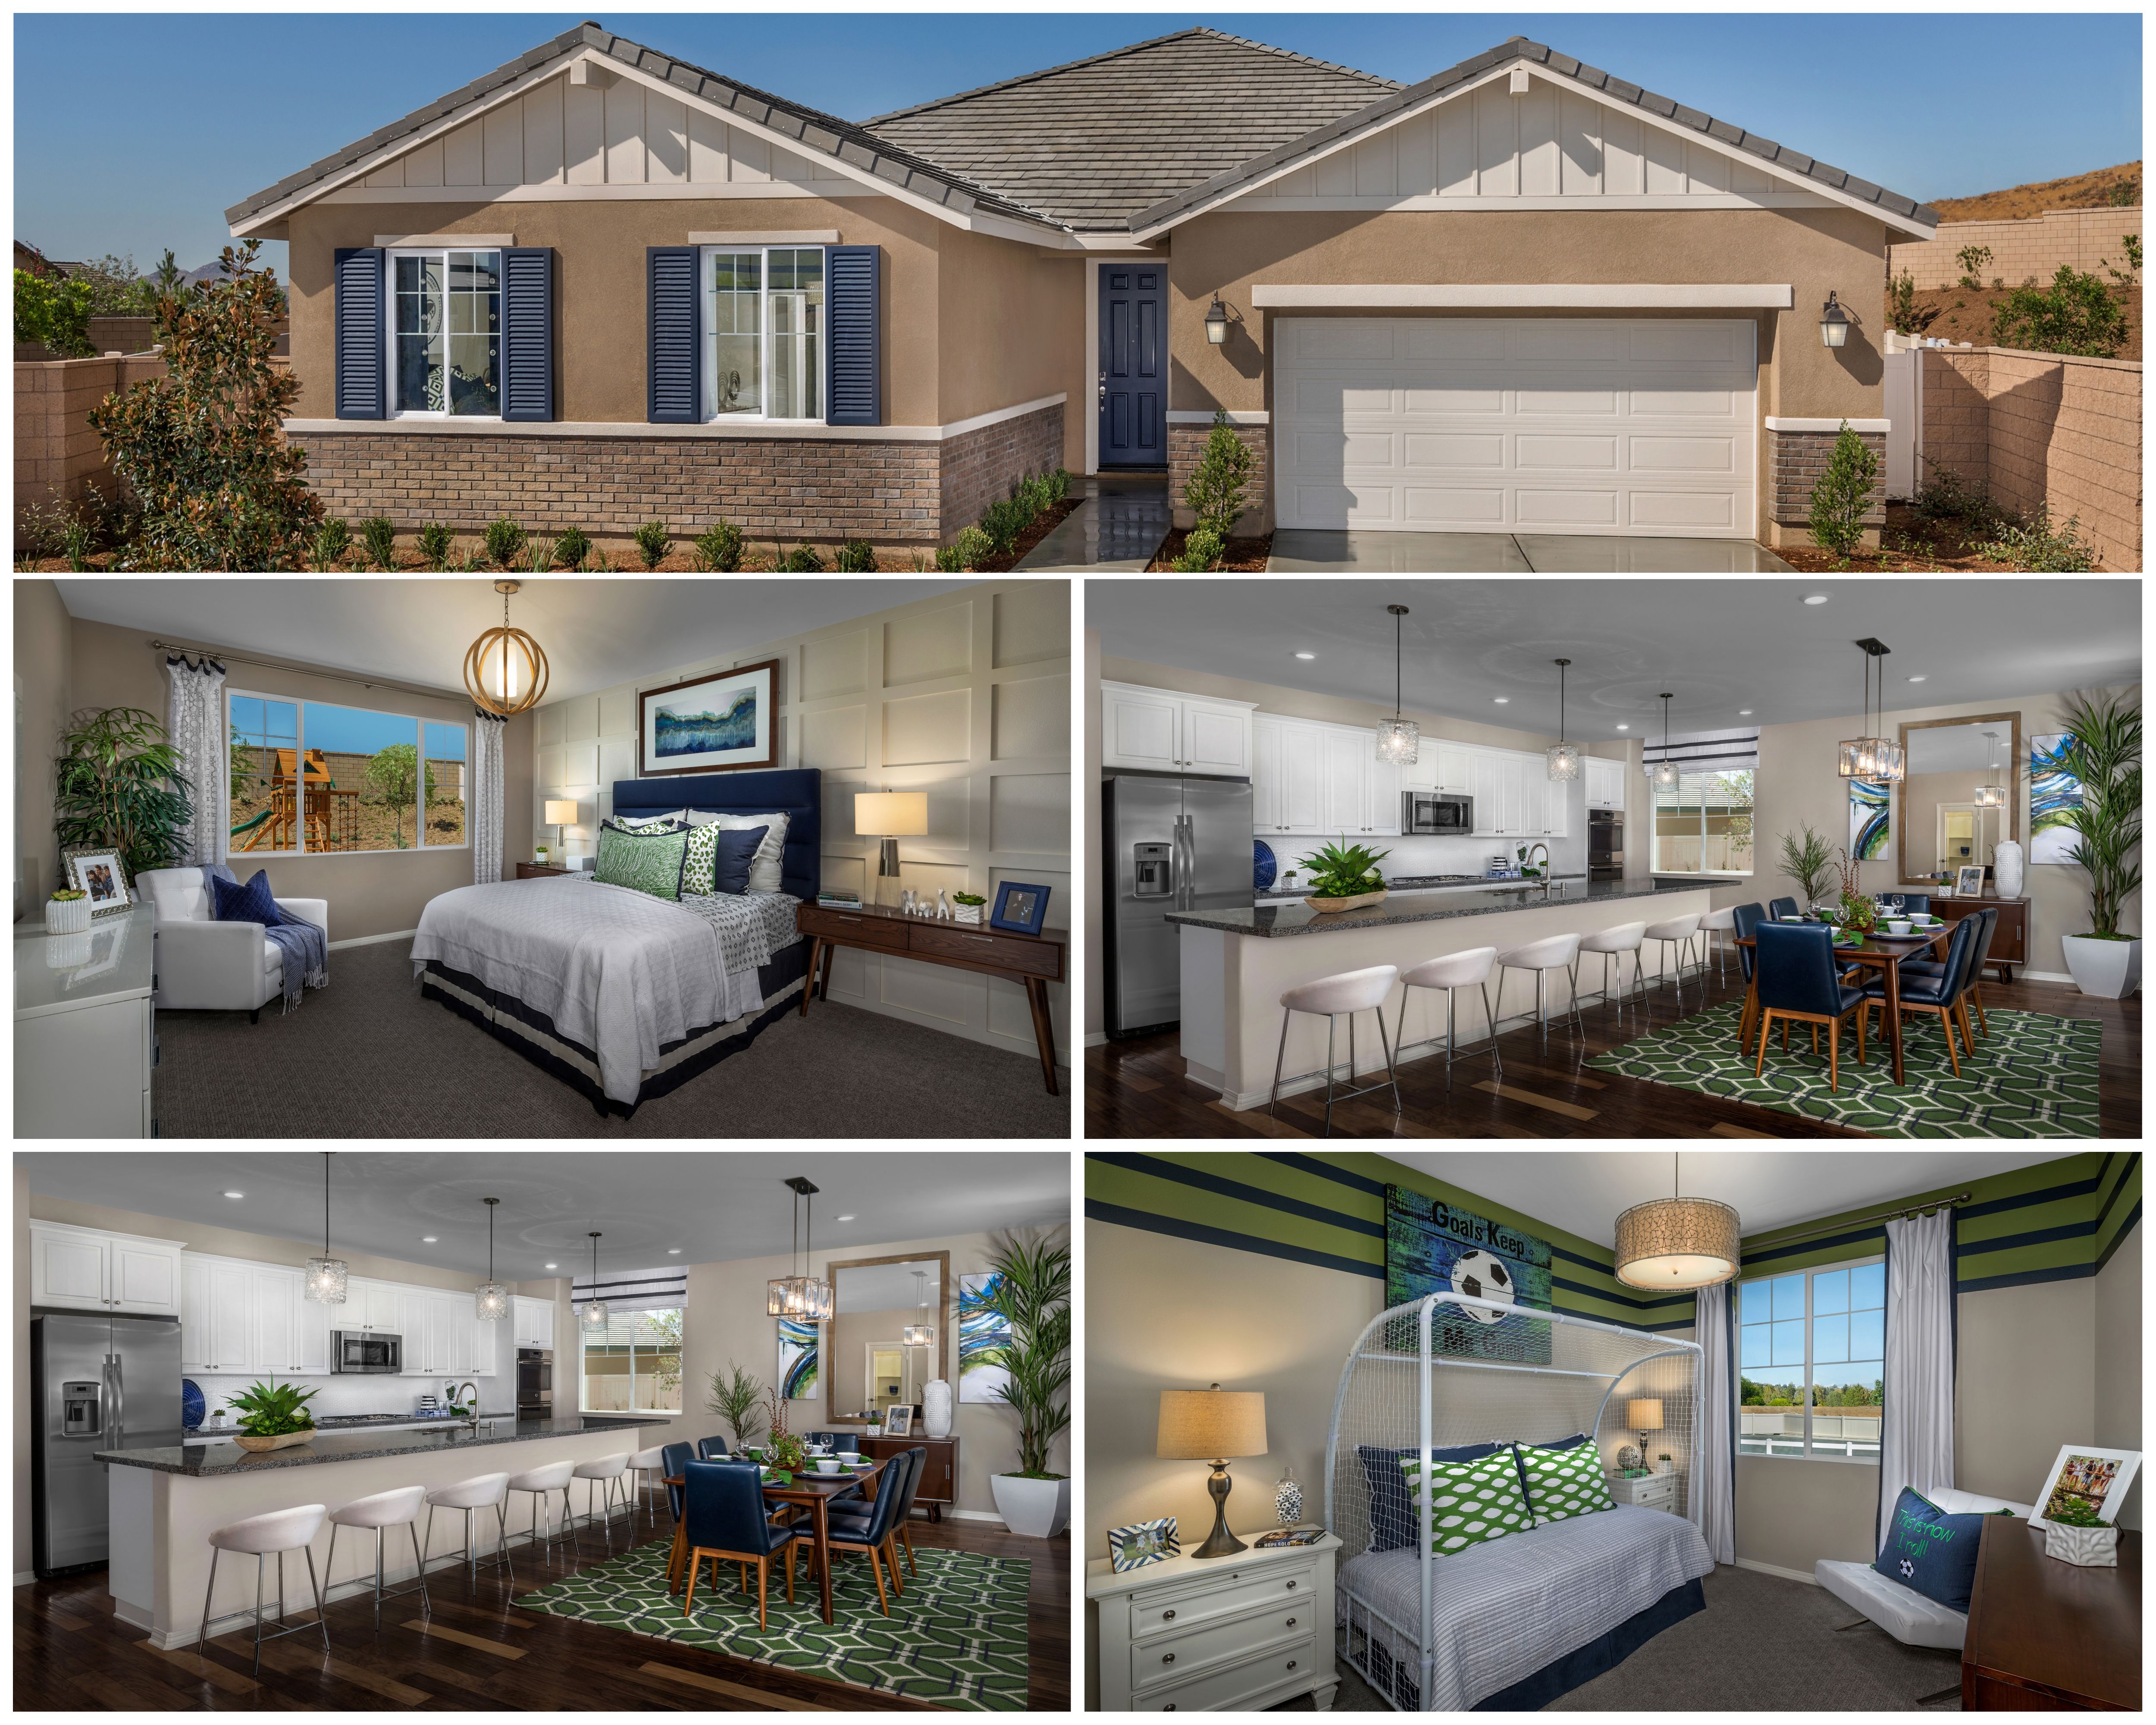 Do you love single-story homes?! Check out the beautiful Residence 5 ...